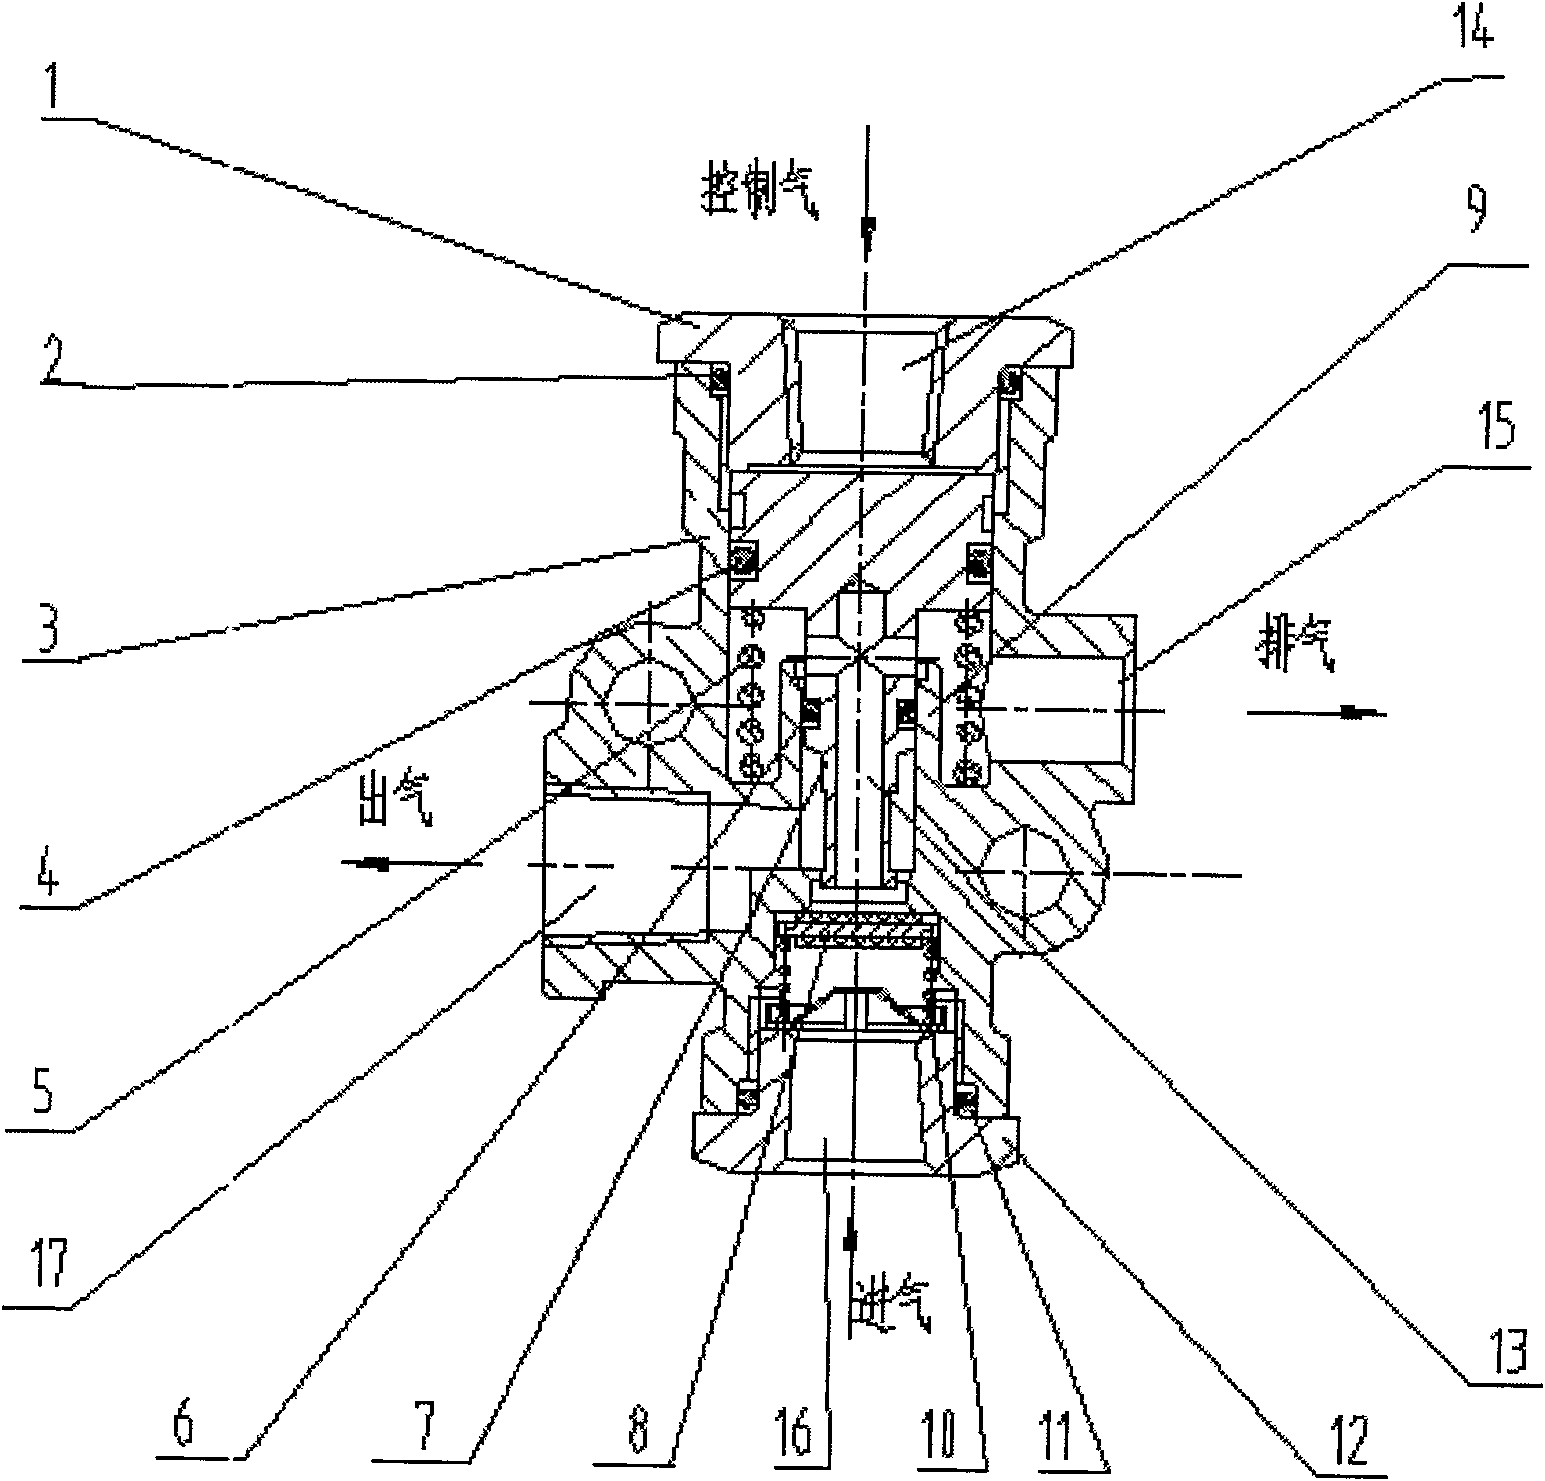 Synchronous valve in use for brake system